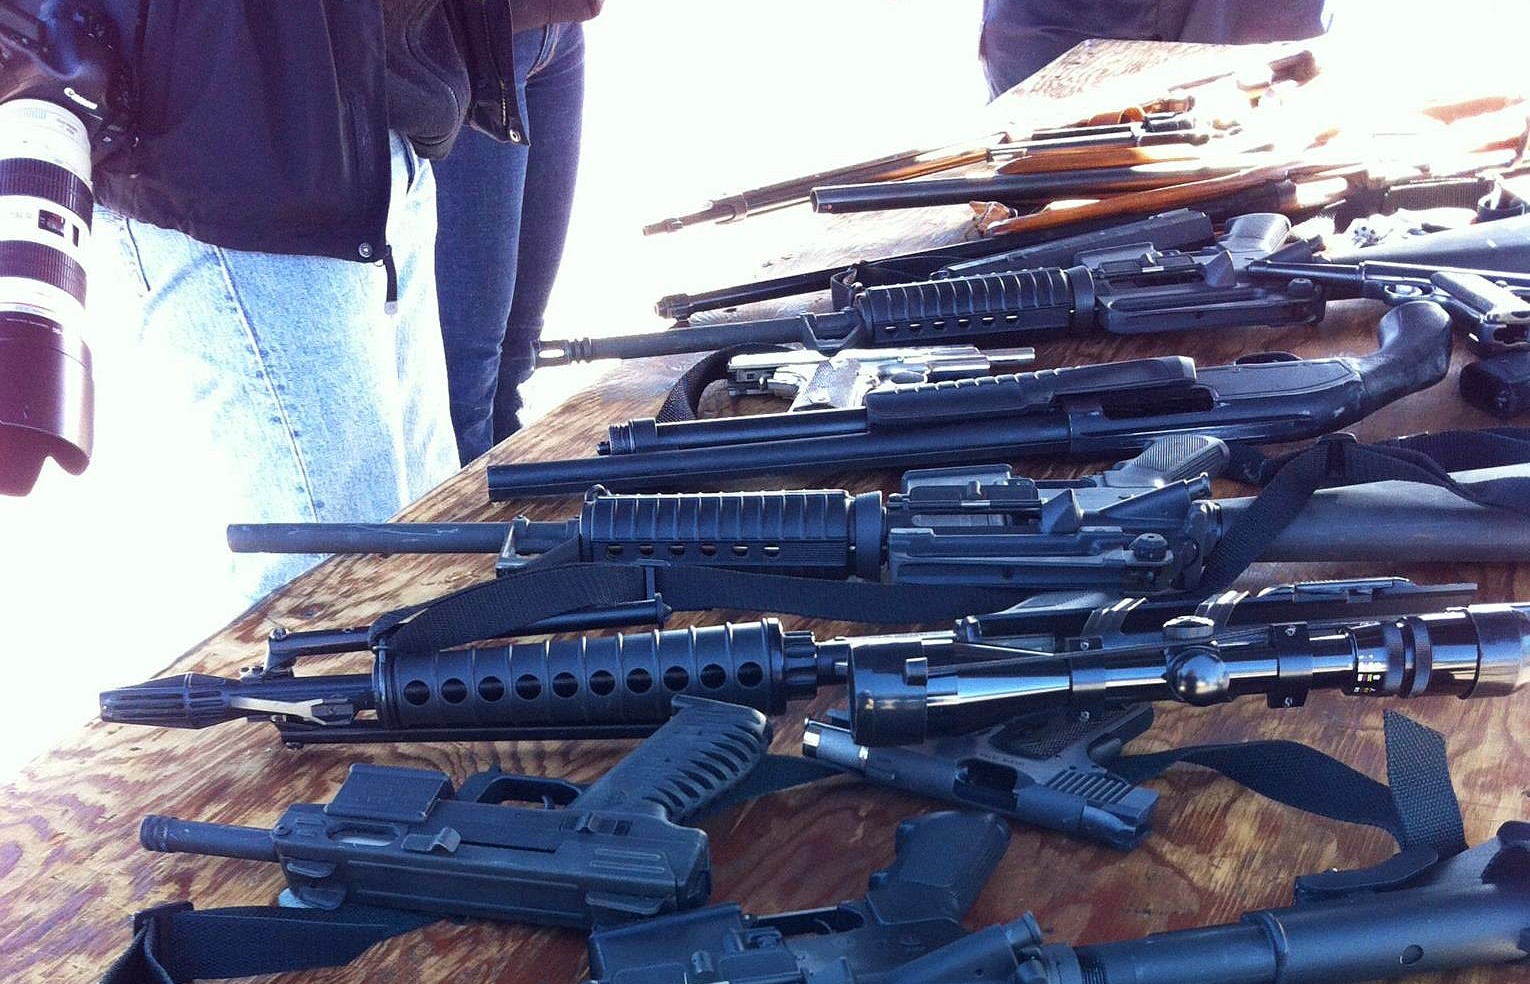 San Mateo County invests in series of gun buyback events